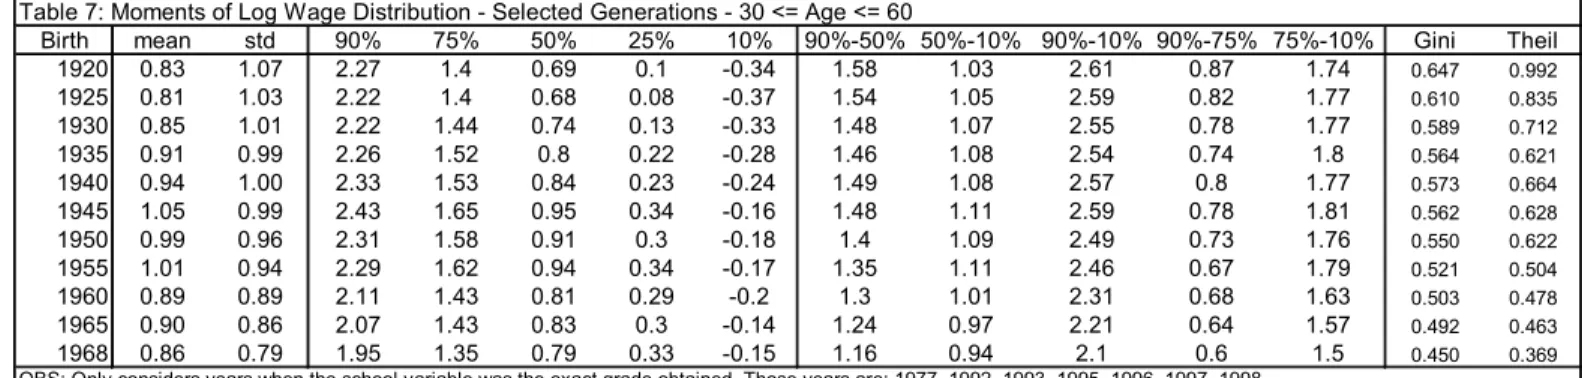 Table 7: Moments of Log Wage Distribution - Selected Generations - 30 &lt;= Age &lt;= 60